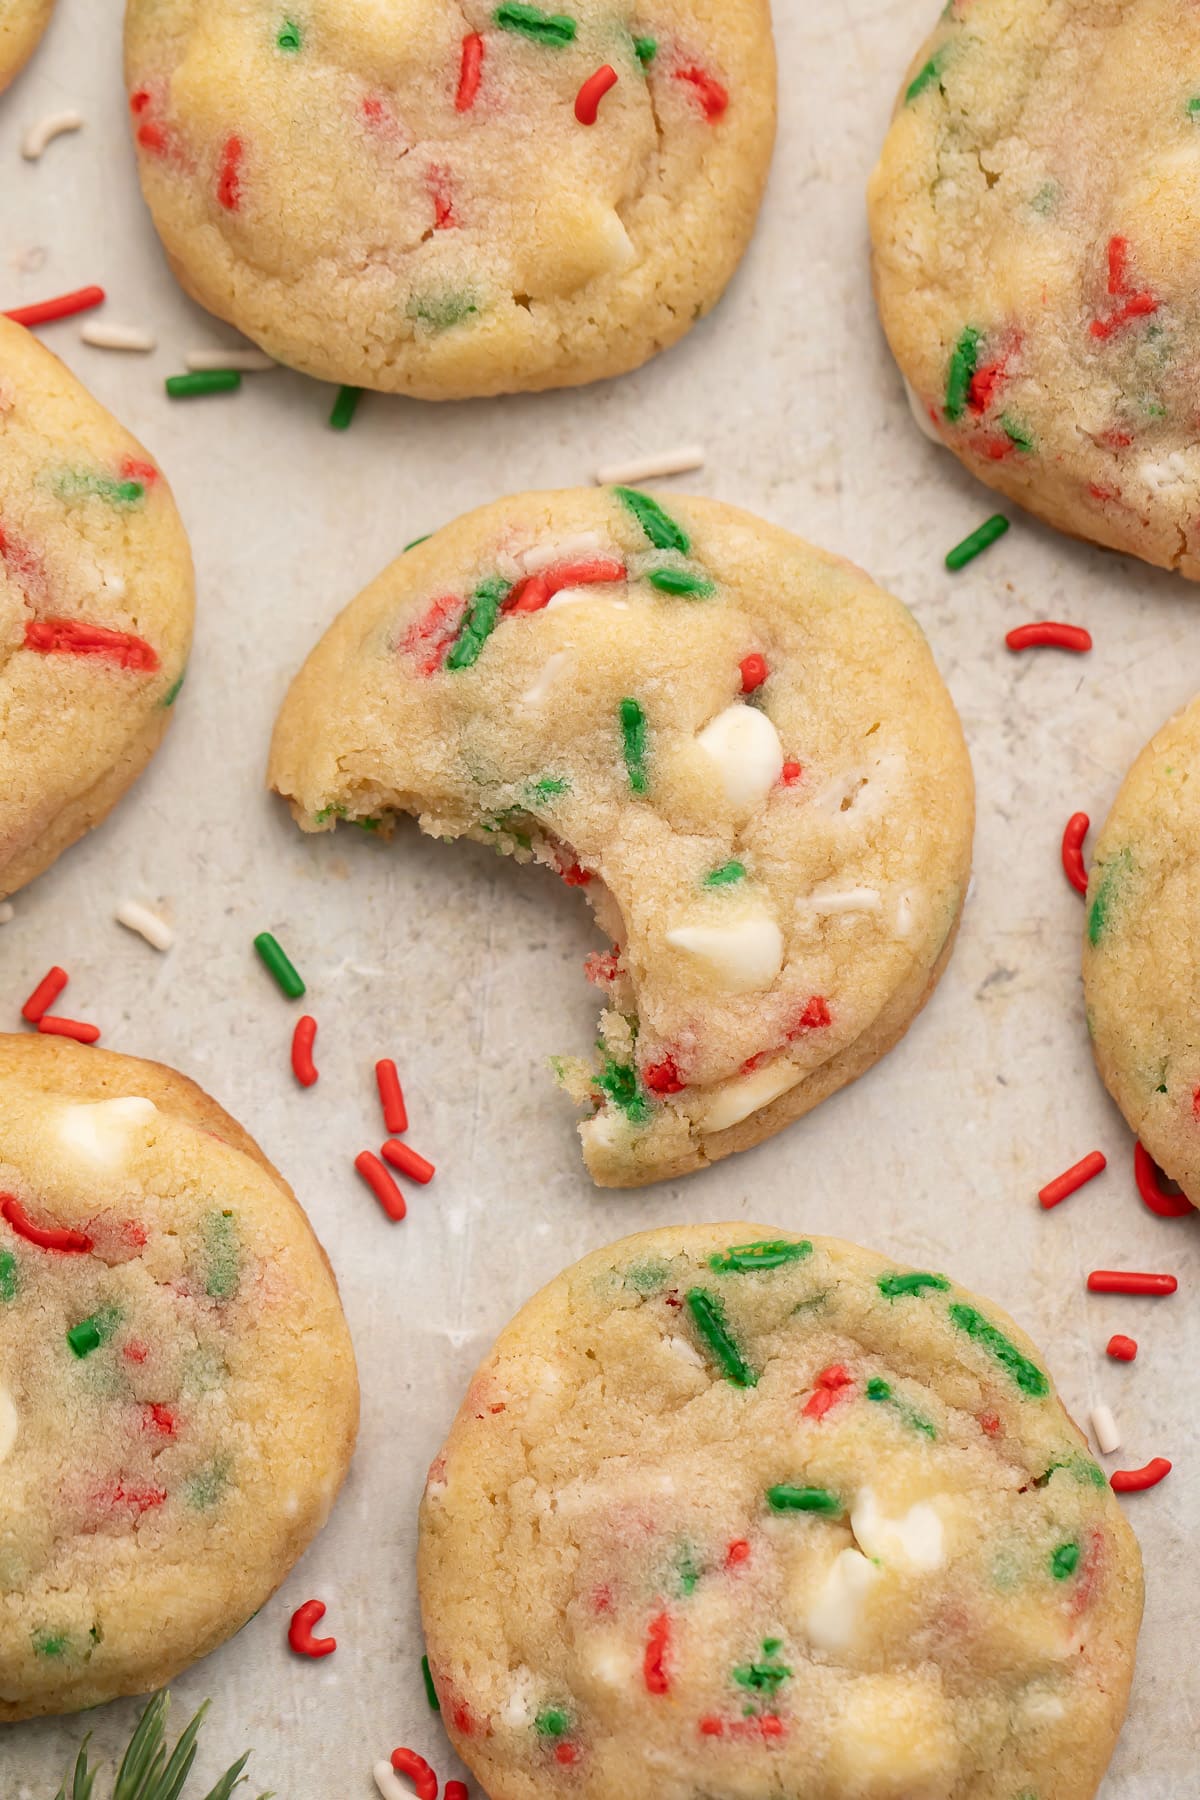 Rows of Christmas confetti cookies on a sheet of parchment paper with red, white, and green sprinkles. The center cookie is missing one bite from the side.